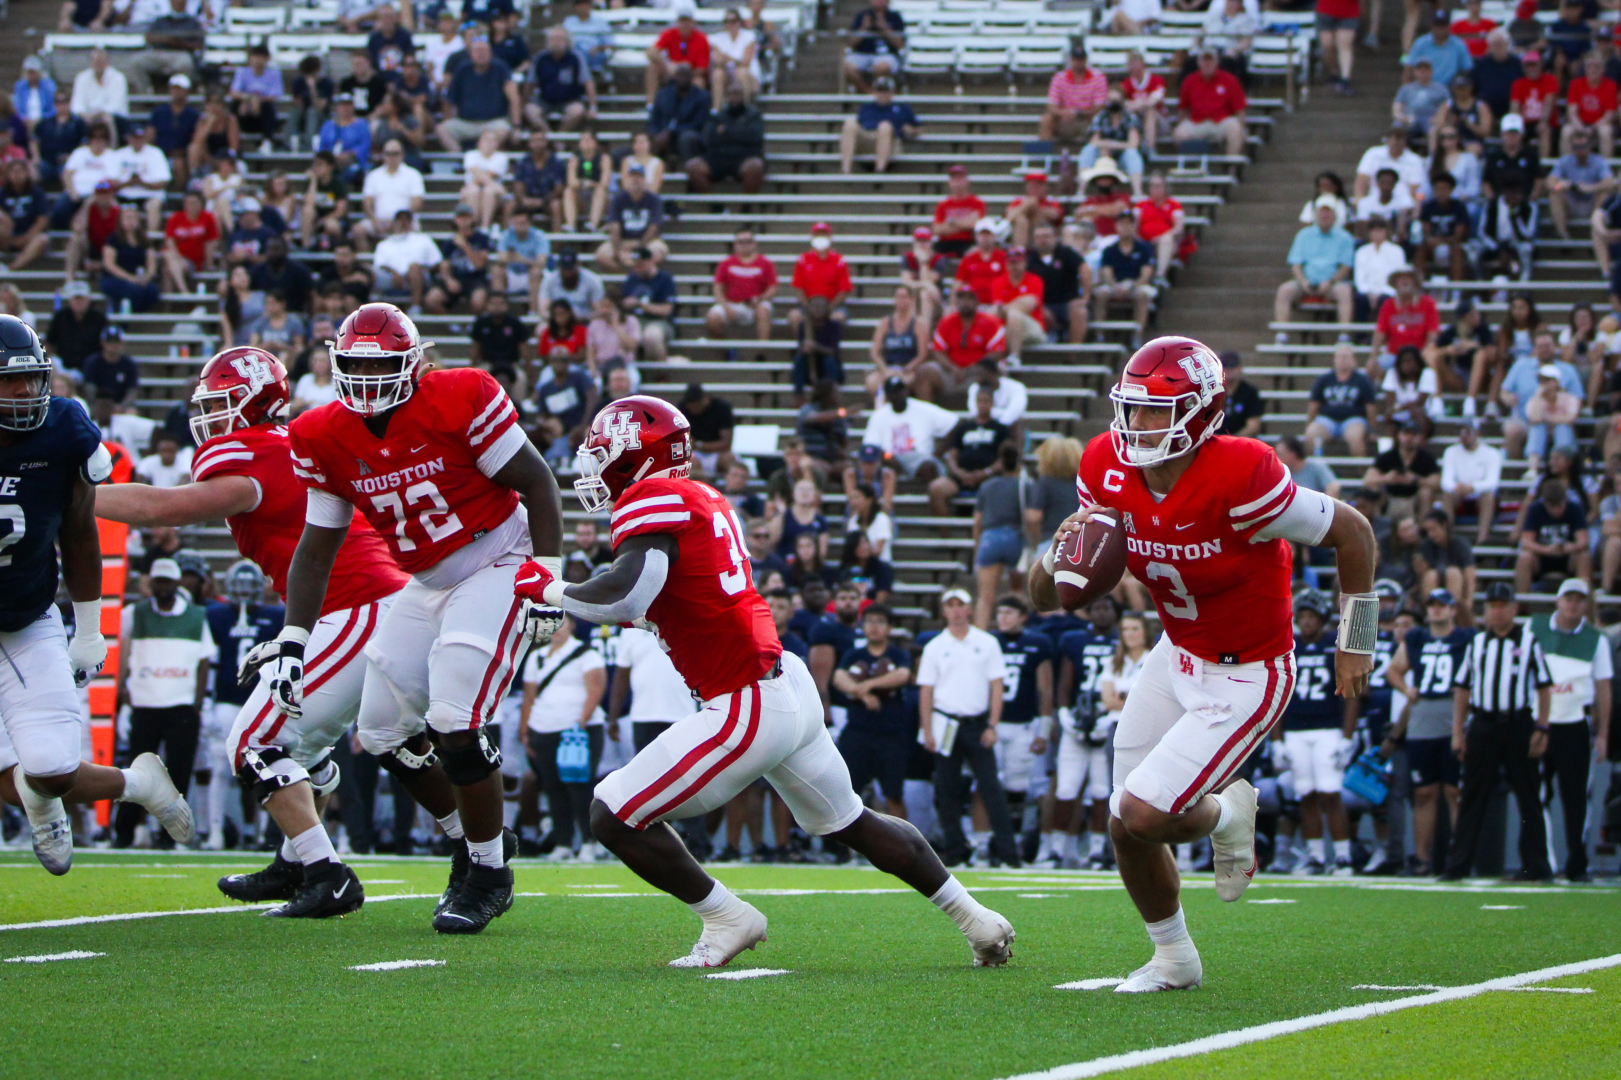 Junior quarterback Clayton Tune scrambles out of the pocket in UH football's win over Rice. | Sean Thomas/The Cougar